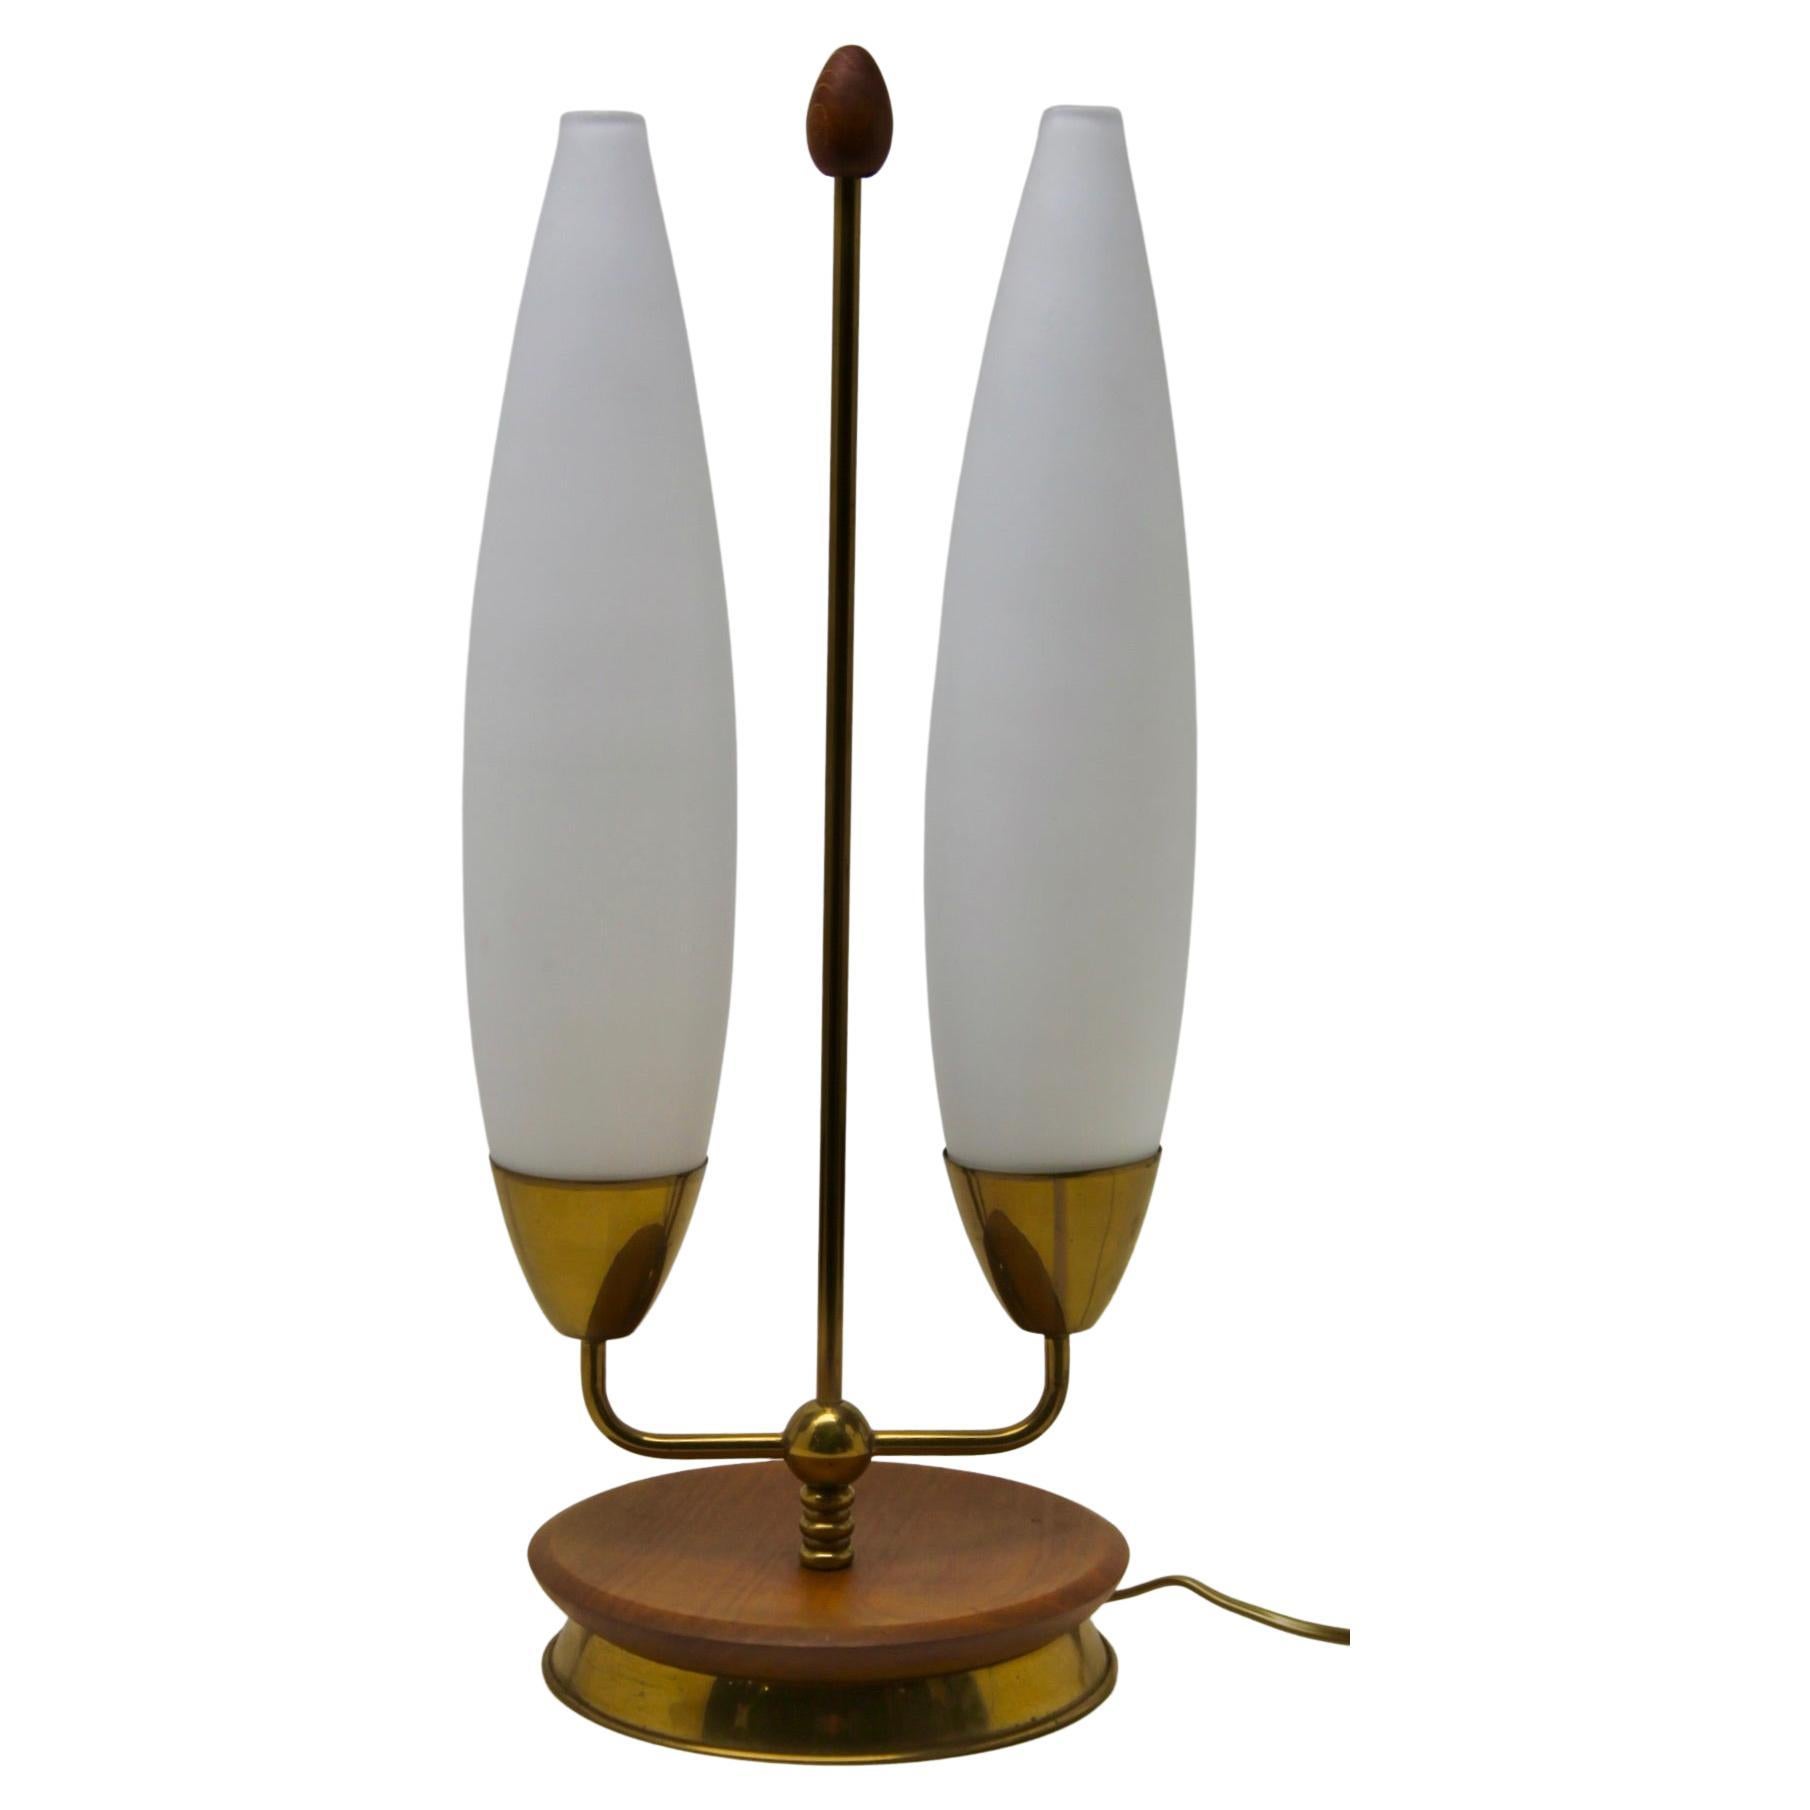 1970s table lamp in the Vintage style with brass fittings on a metal and Wood base. The lamp has a shade made of acid-etched milk-glass giving it a matte, white surface, and provides a strong up-light with a softer, diffused light at eye